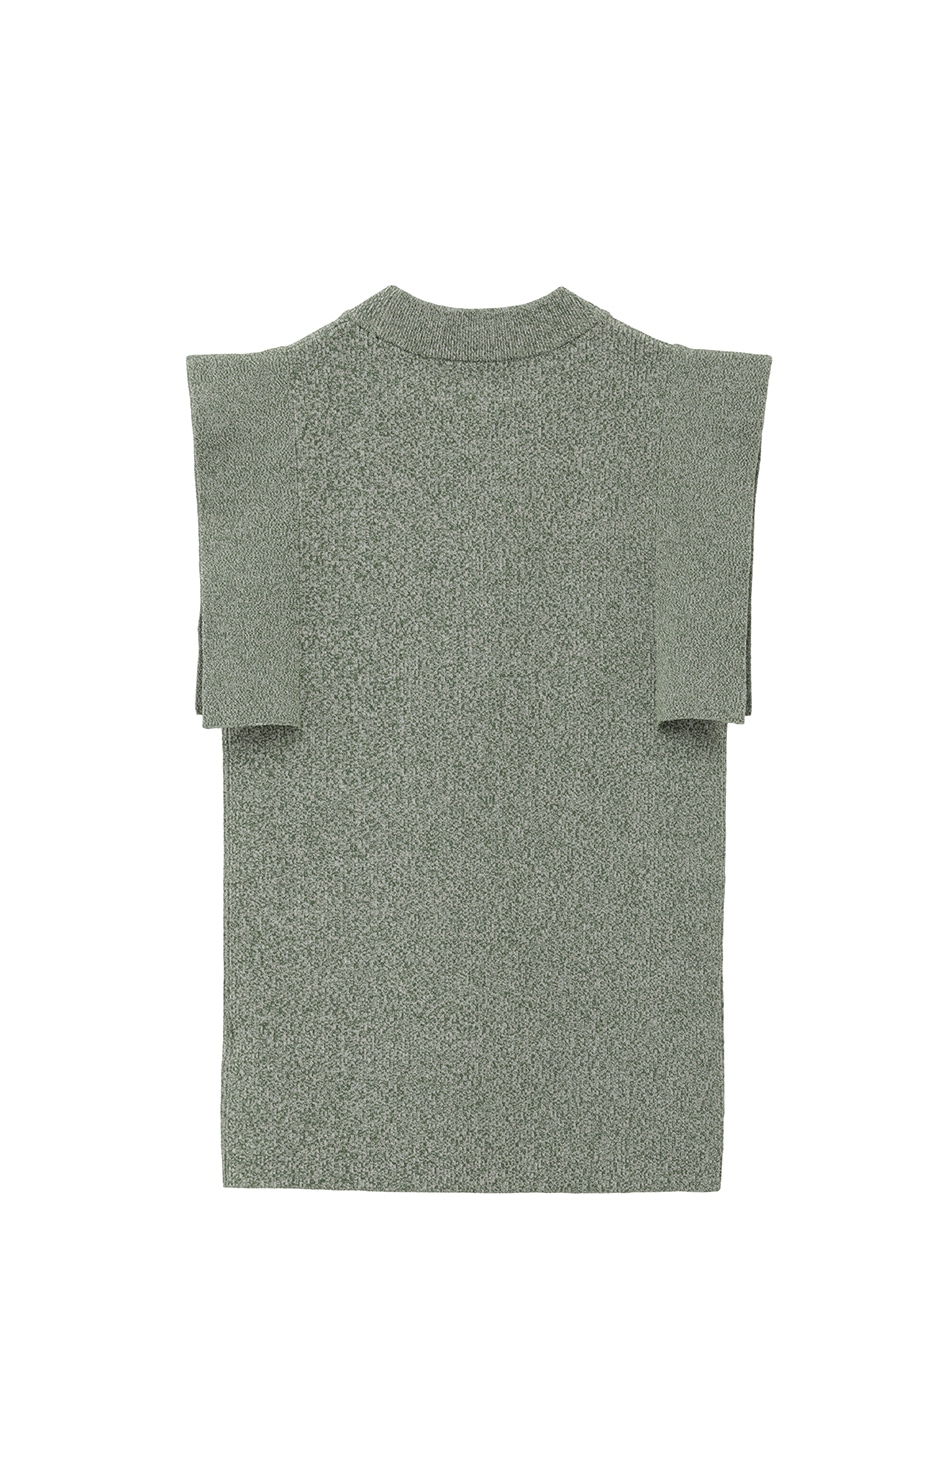 SQUARE SLEEVE KNIT TOPS｜TOPS(トップス)｜CLANE OFFICIAL ONLINE STORE